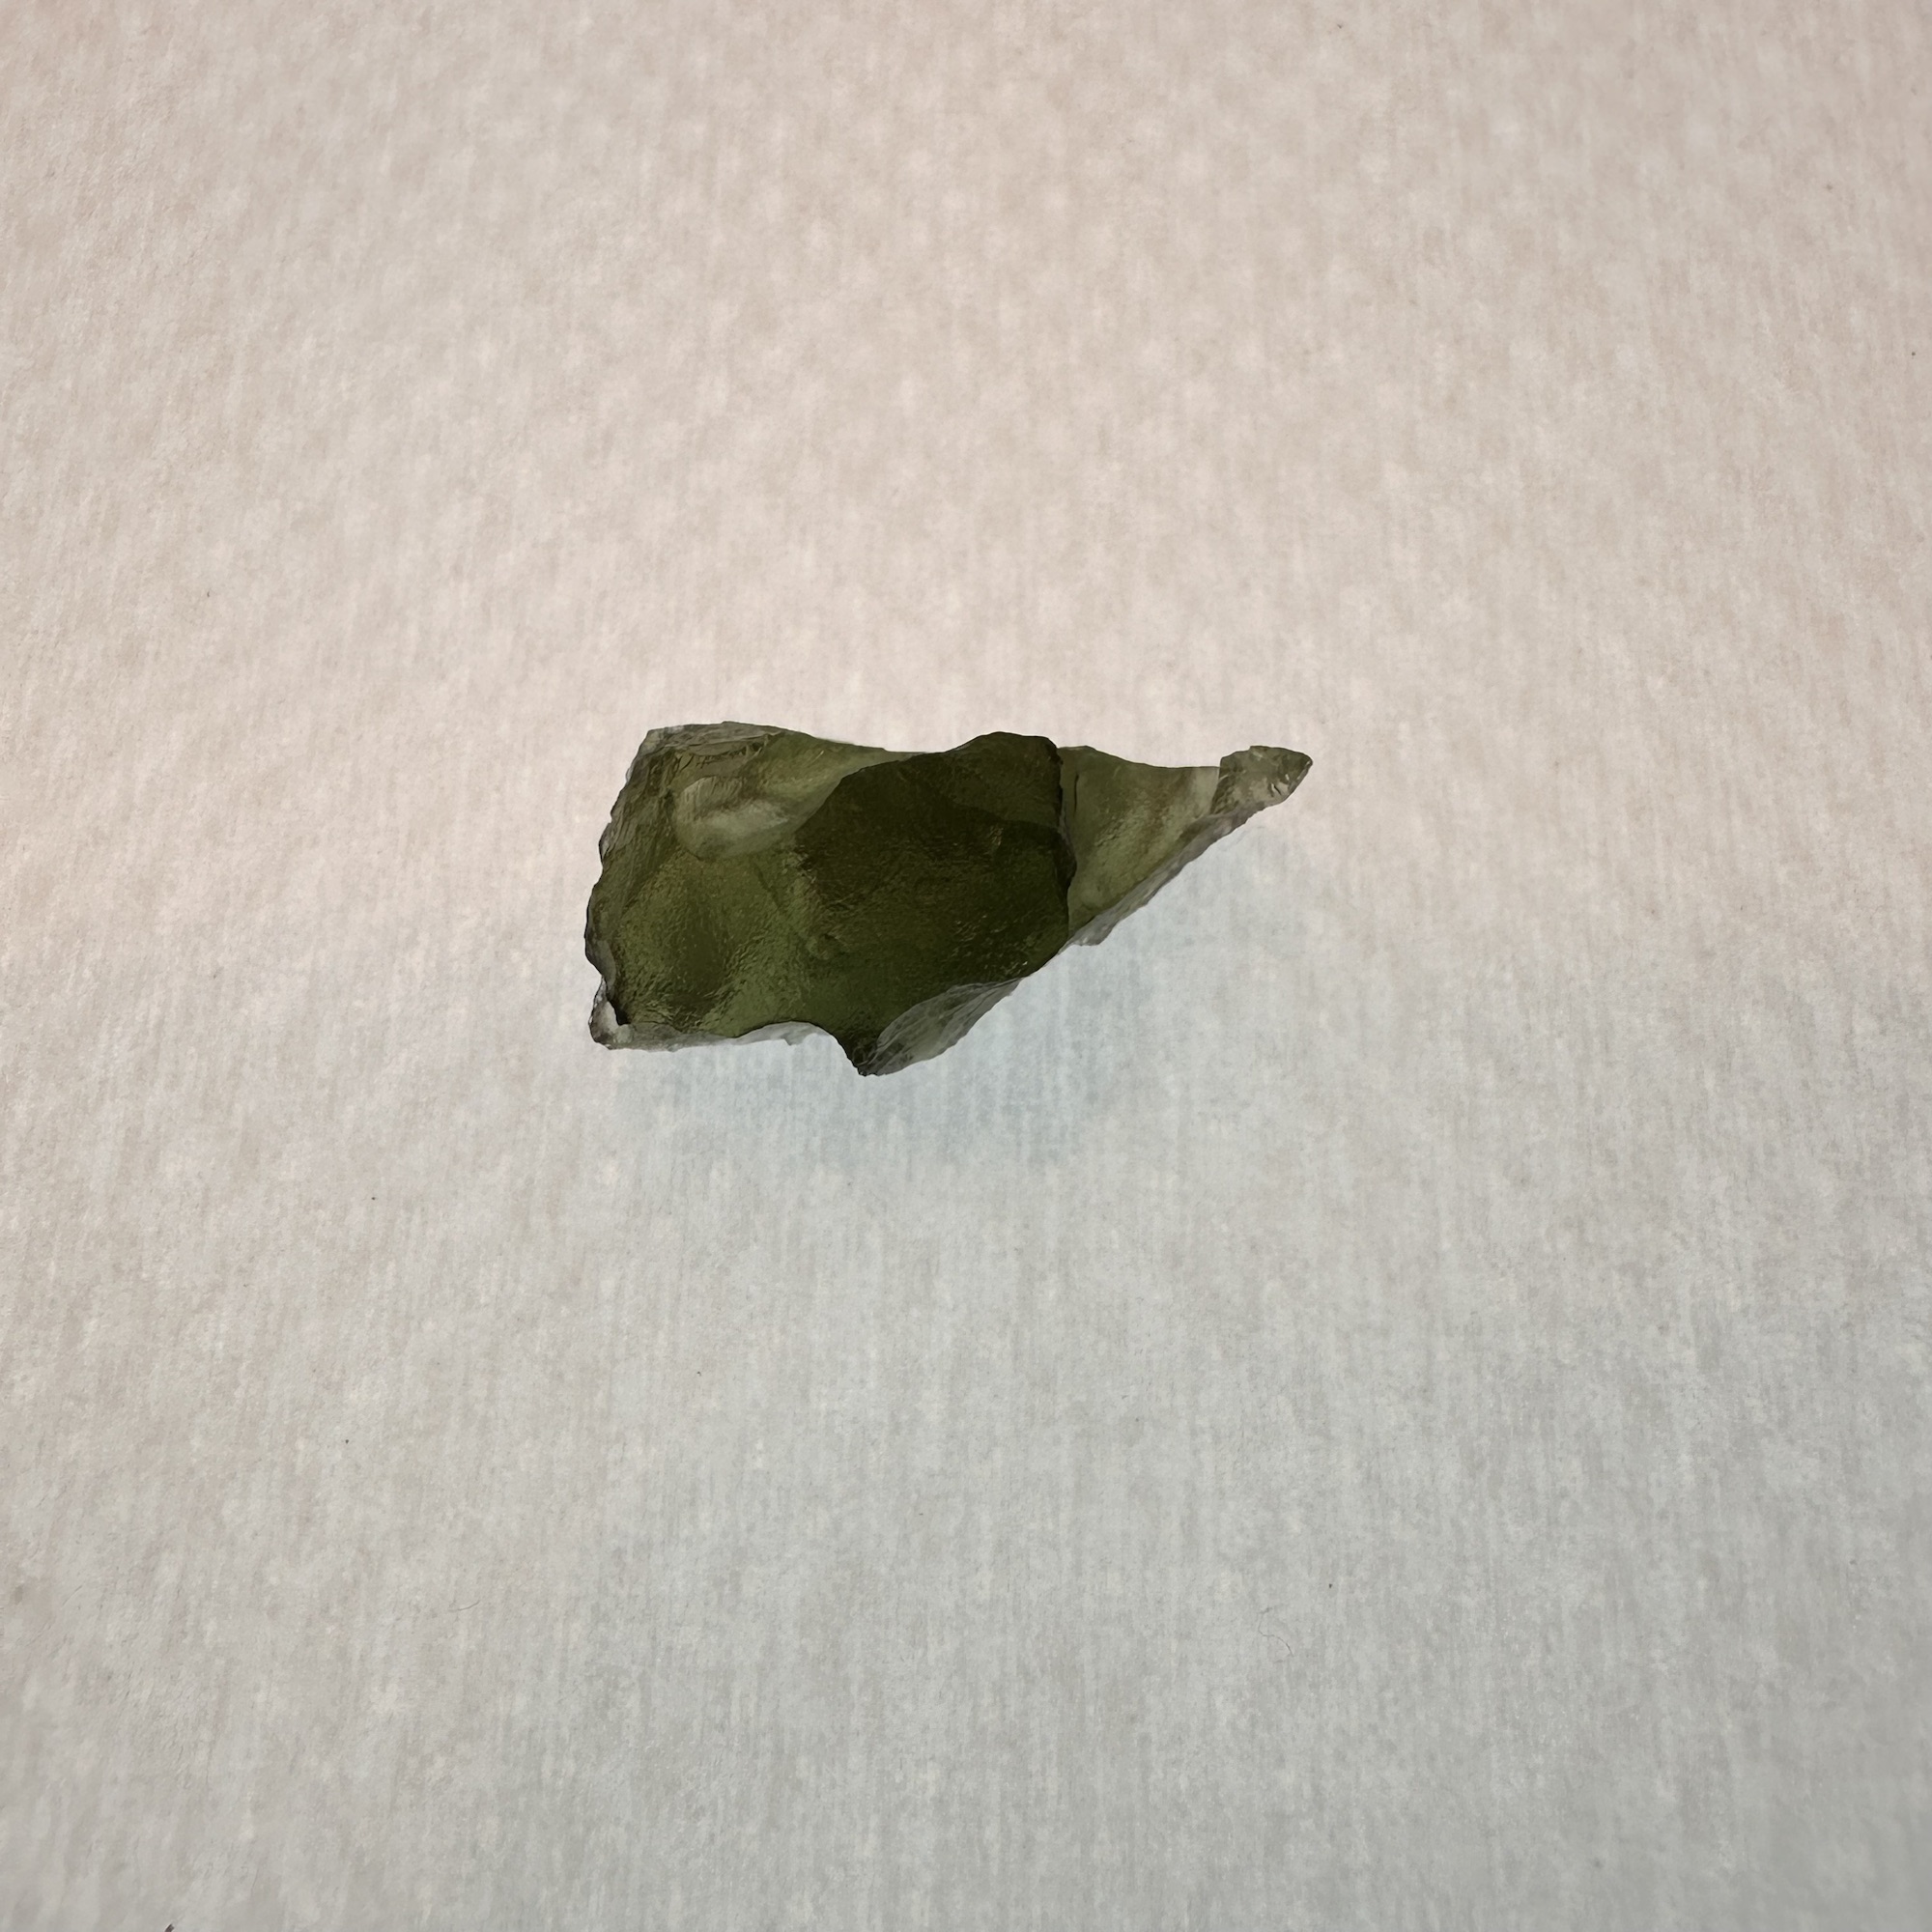 This meteorite obsidian, Moldavite is stunning, and was found in the Czech Republic. Guaranteed authentic.